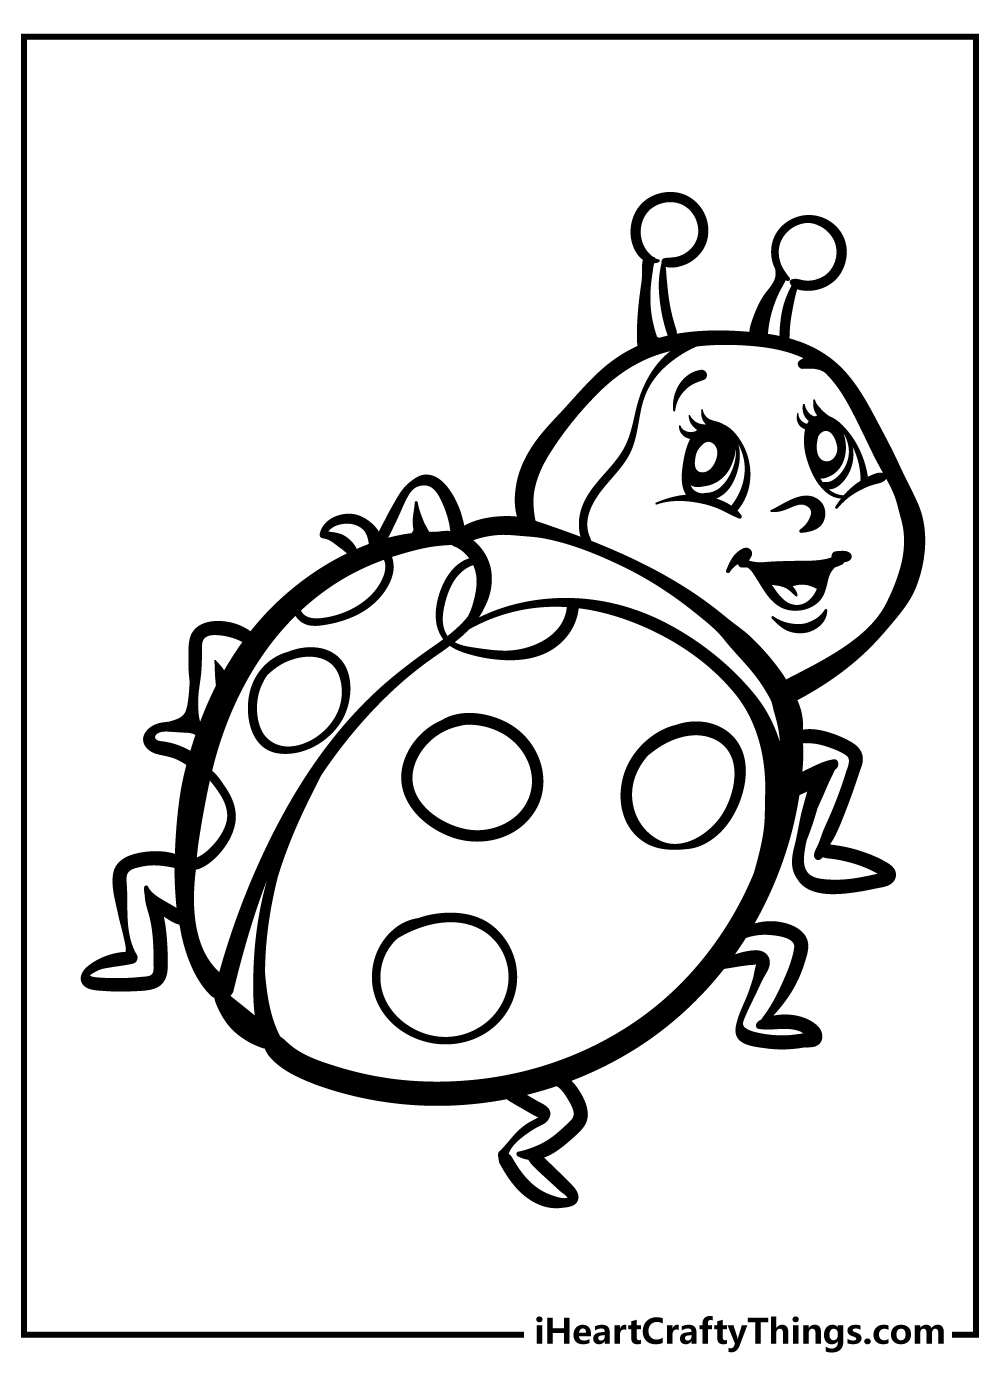 Ladybug Coloring Pages for kids free download